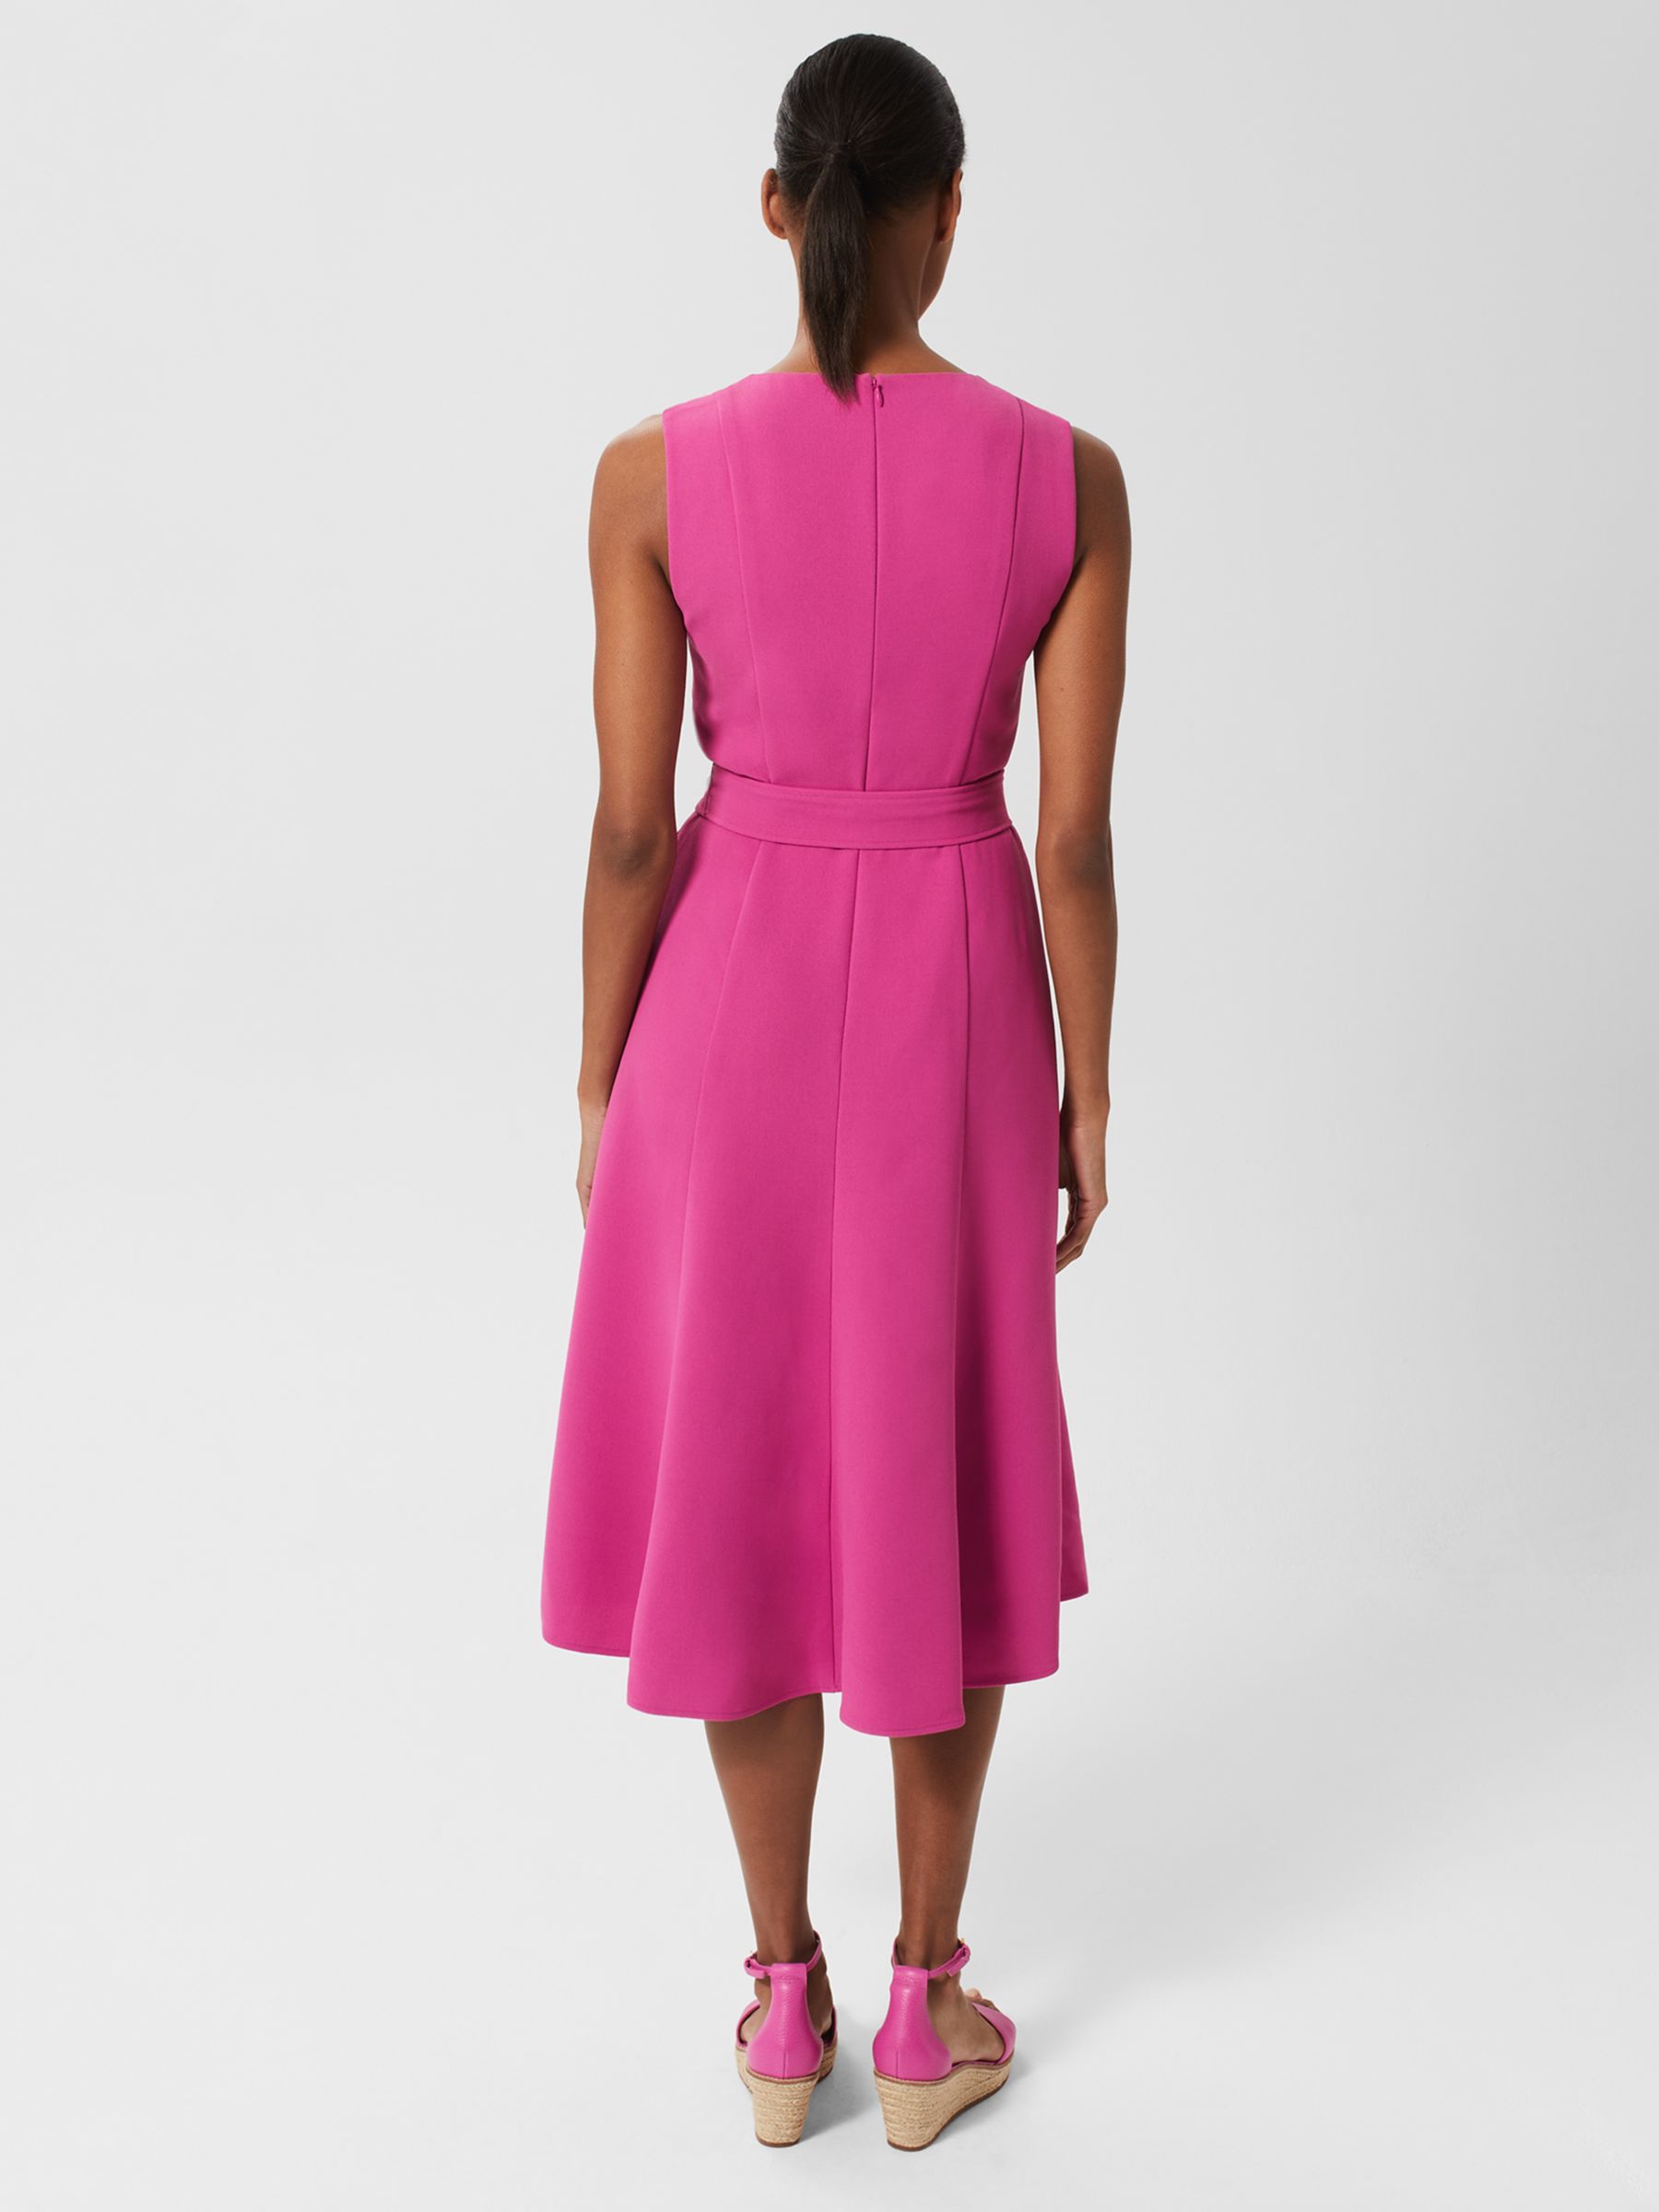 Hobbs Rory Belted Dress, Fuchsia at John Lewis & Partners